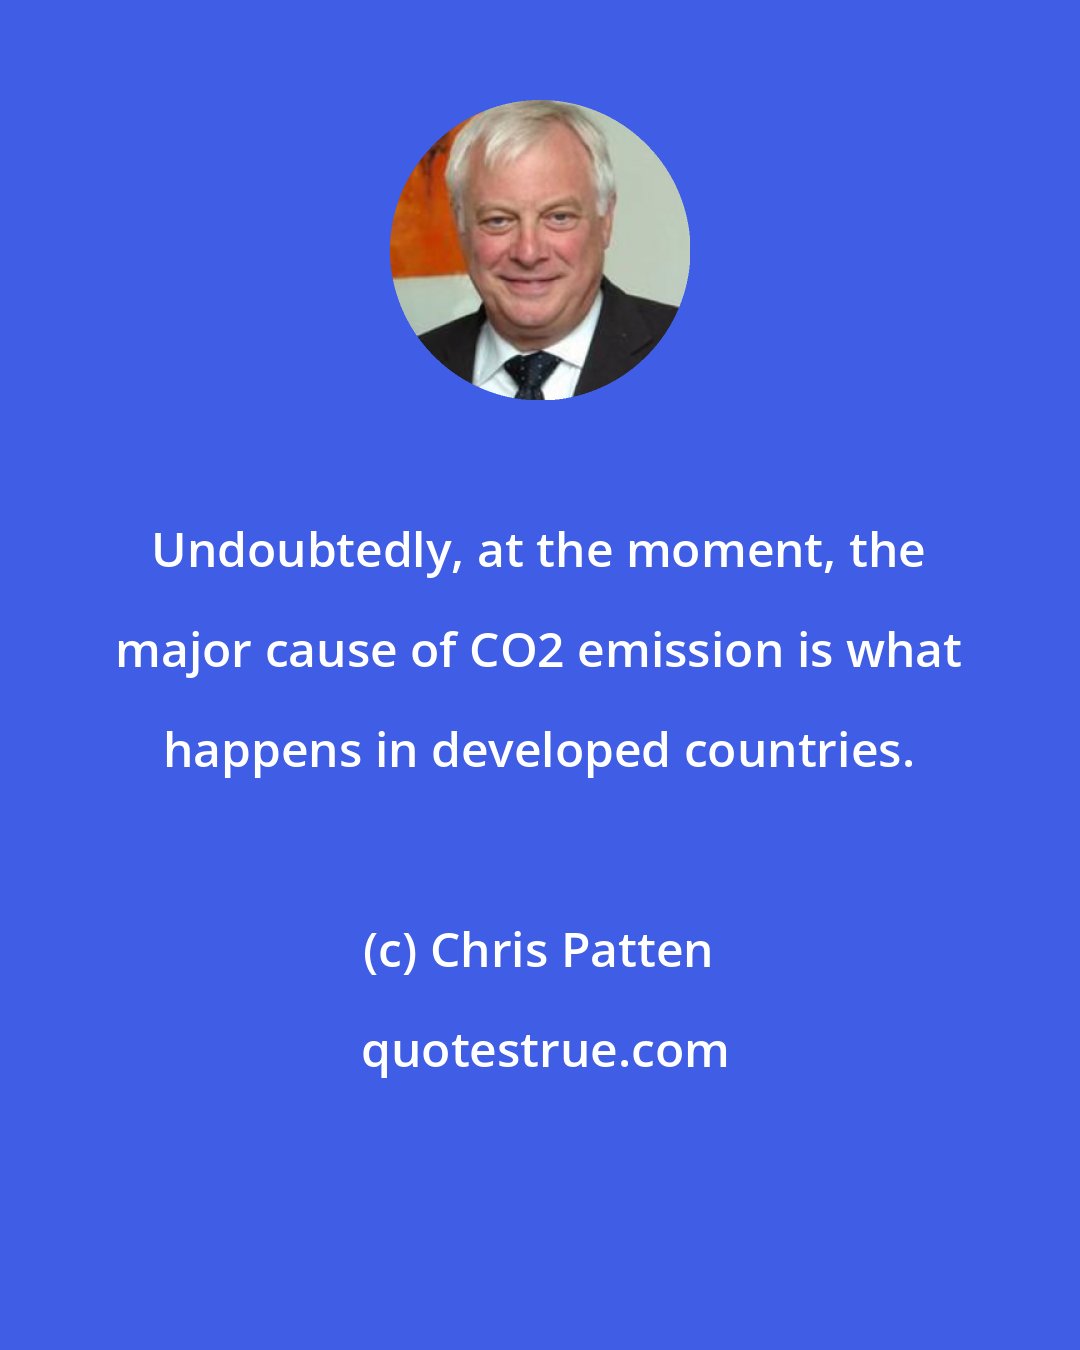 Chris Patten: Undoubtedly, at the moment, the major cause of CO2 emission is what happens in developed countries.